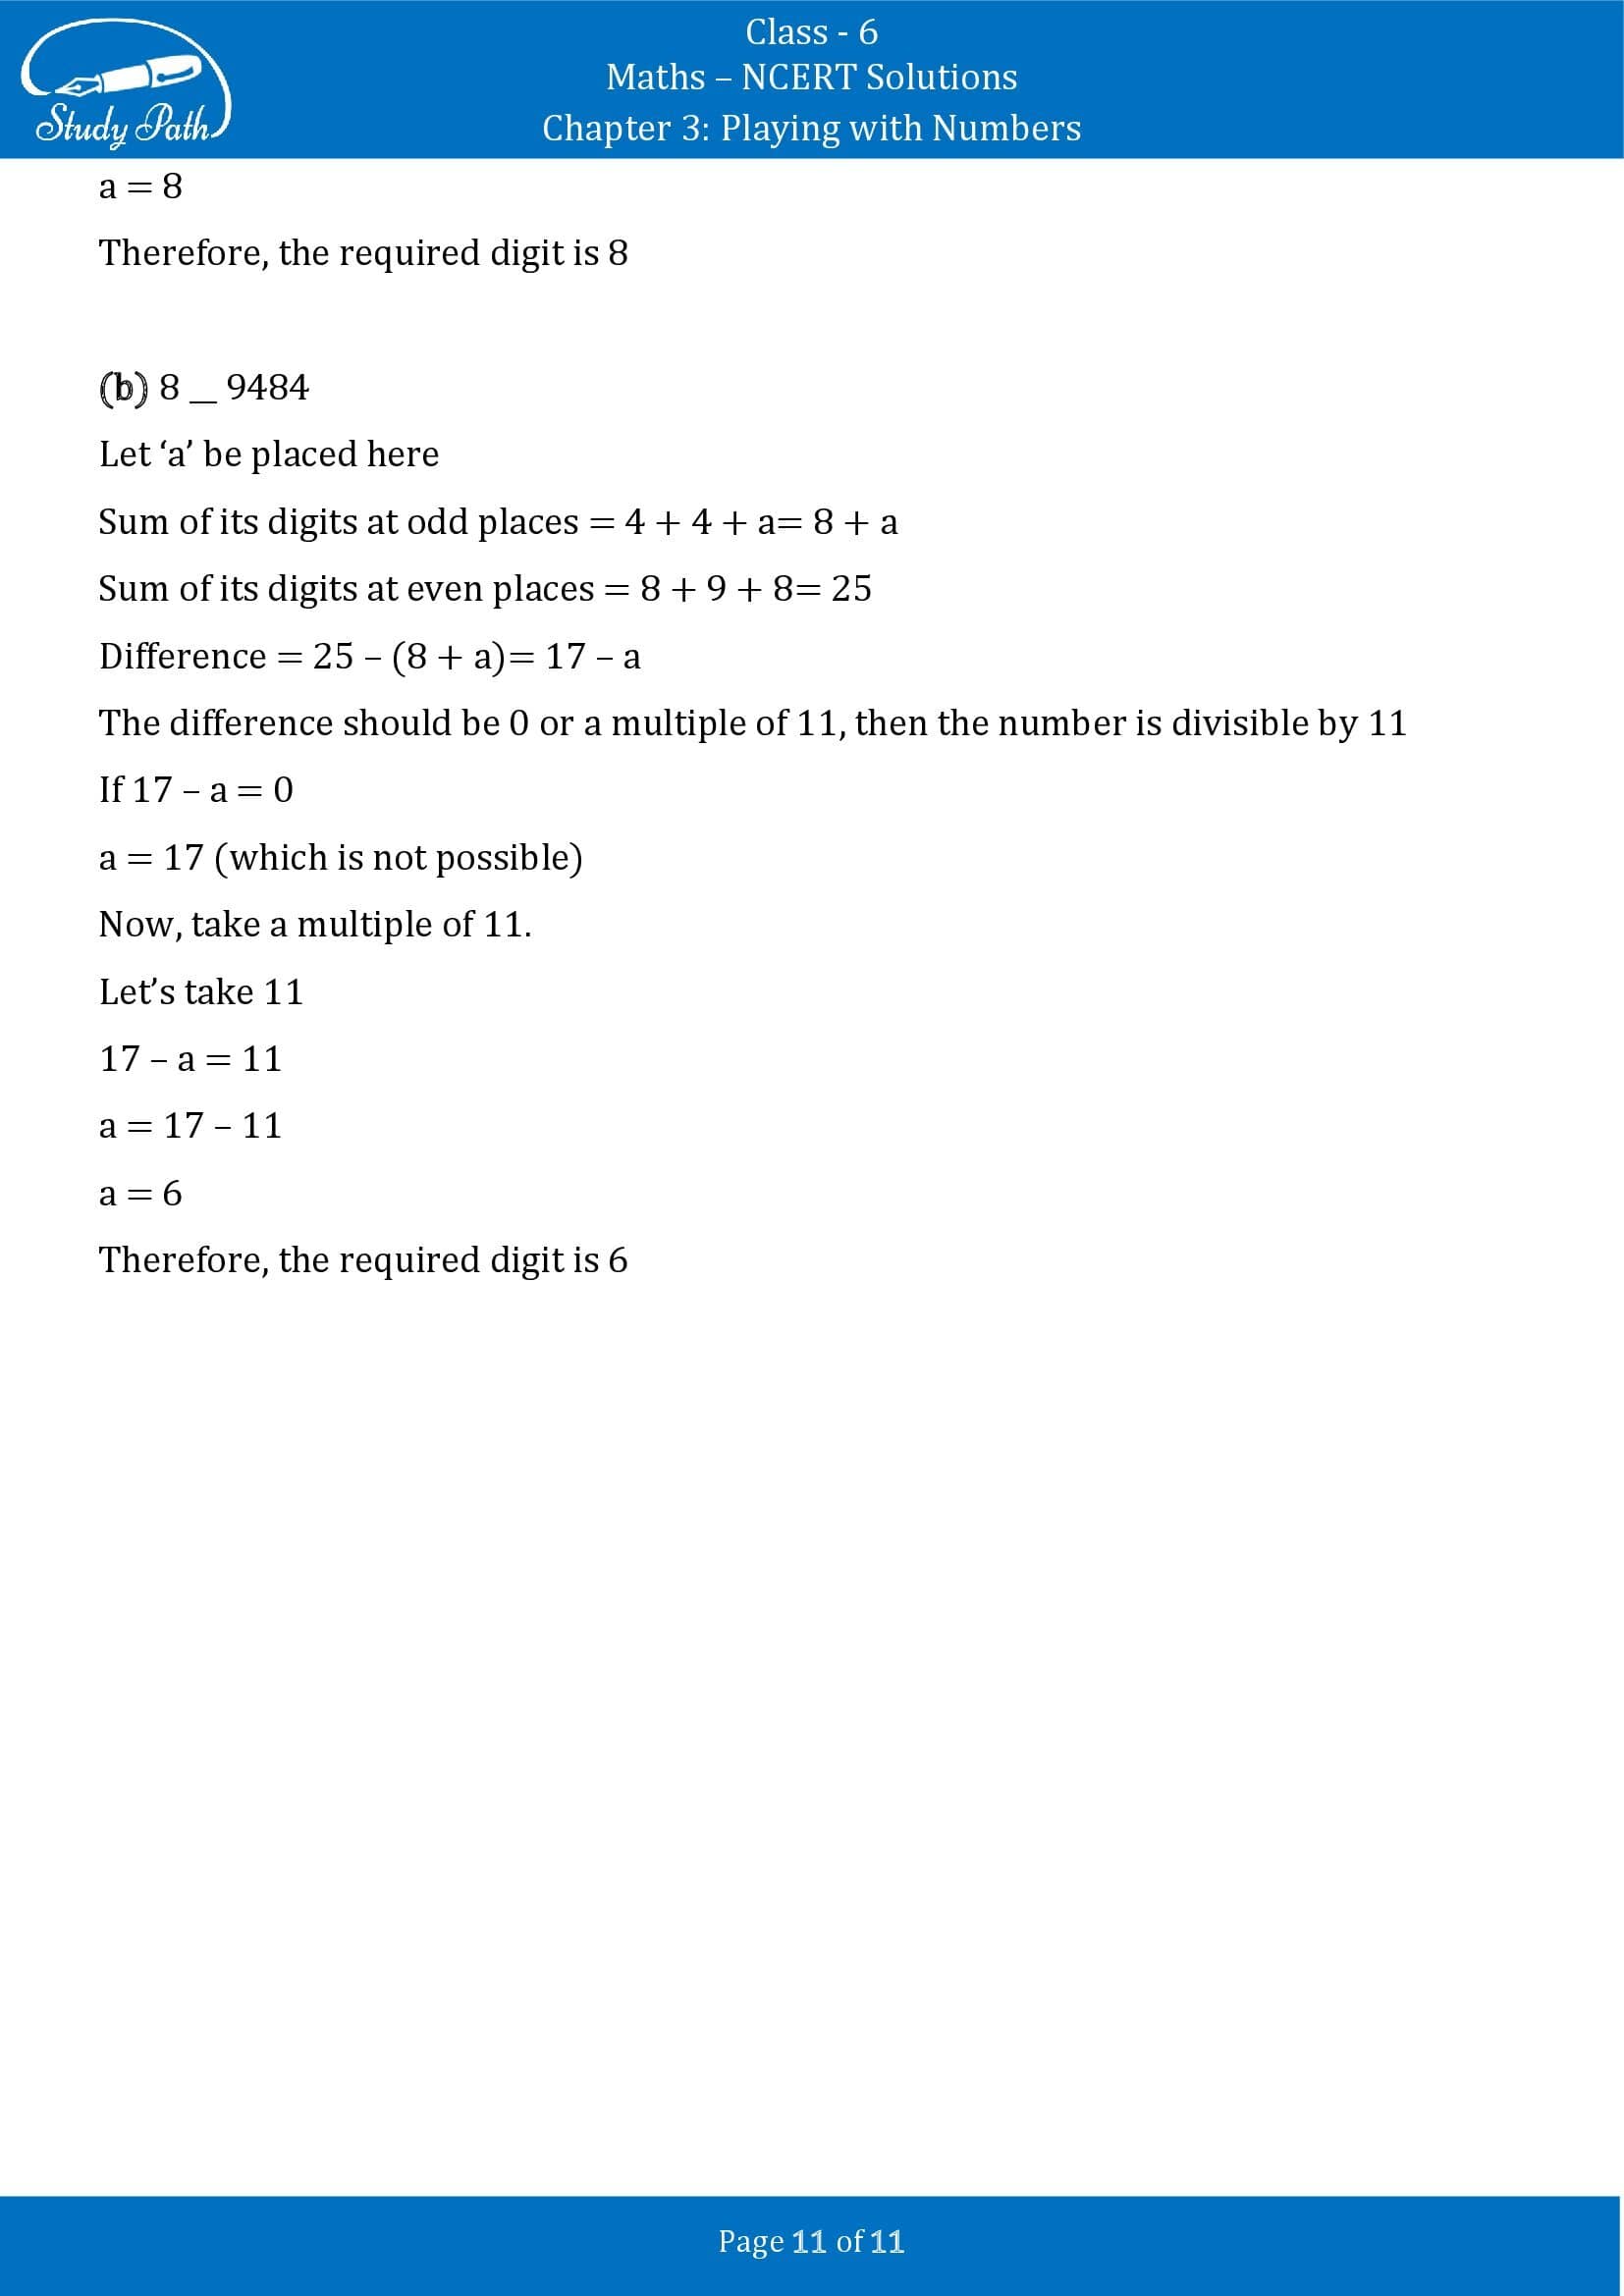 NCERT Solutions for Class 6 Maths Chapter 3 Playing with Numbers Exercise 3.3 00011